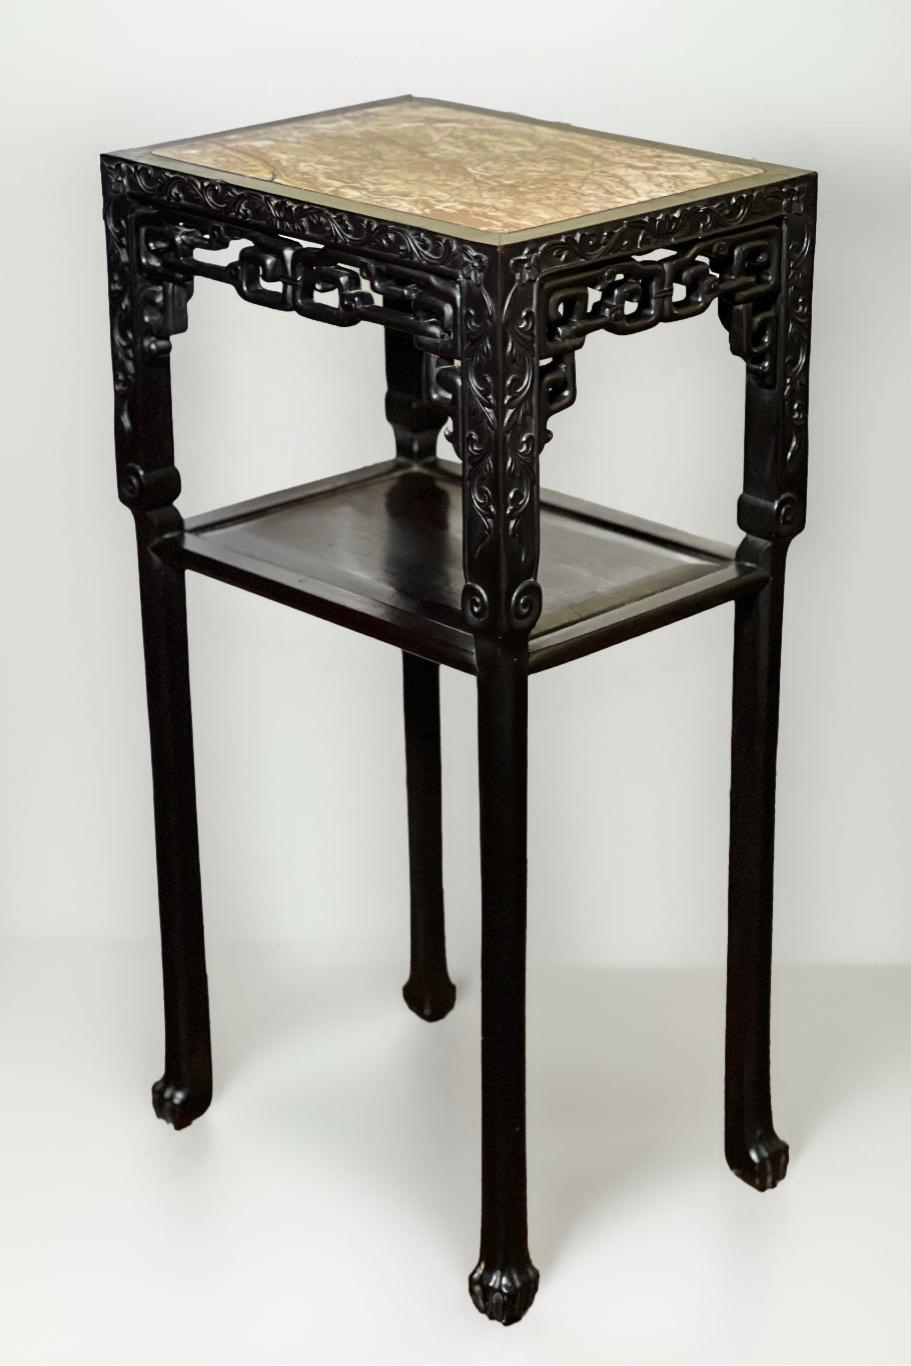 Qing 19th Century Chinese Carved Hardwood Two-Tier Marble Top Pedestal Table or Stand For Sale